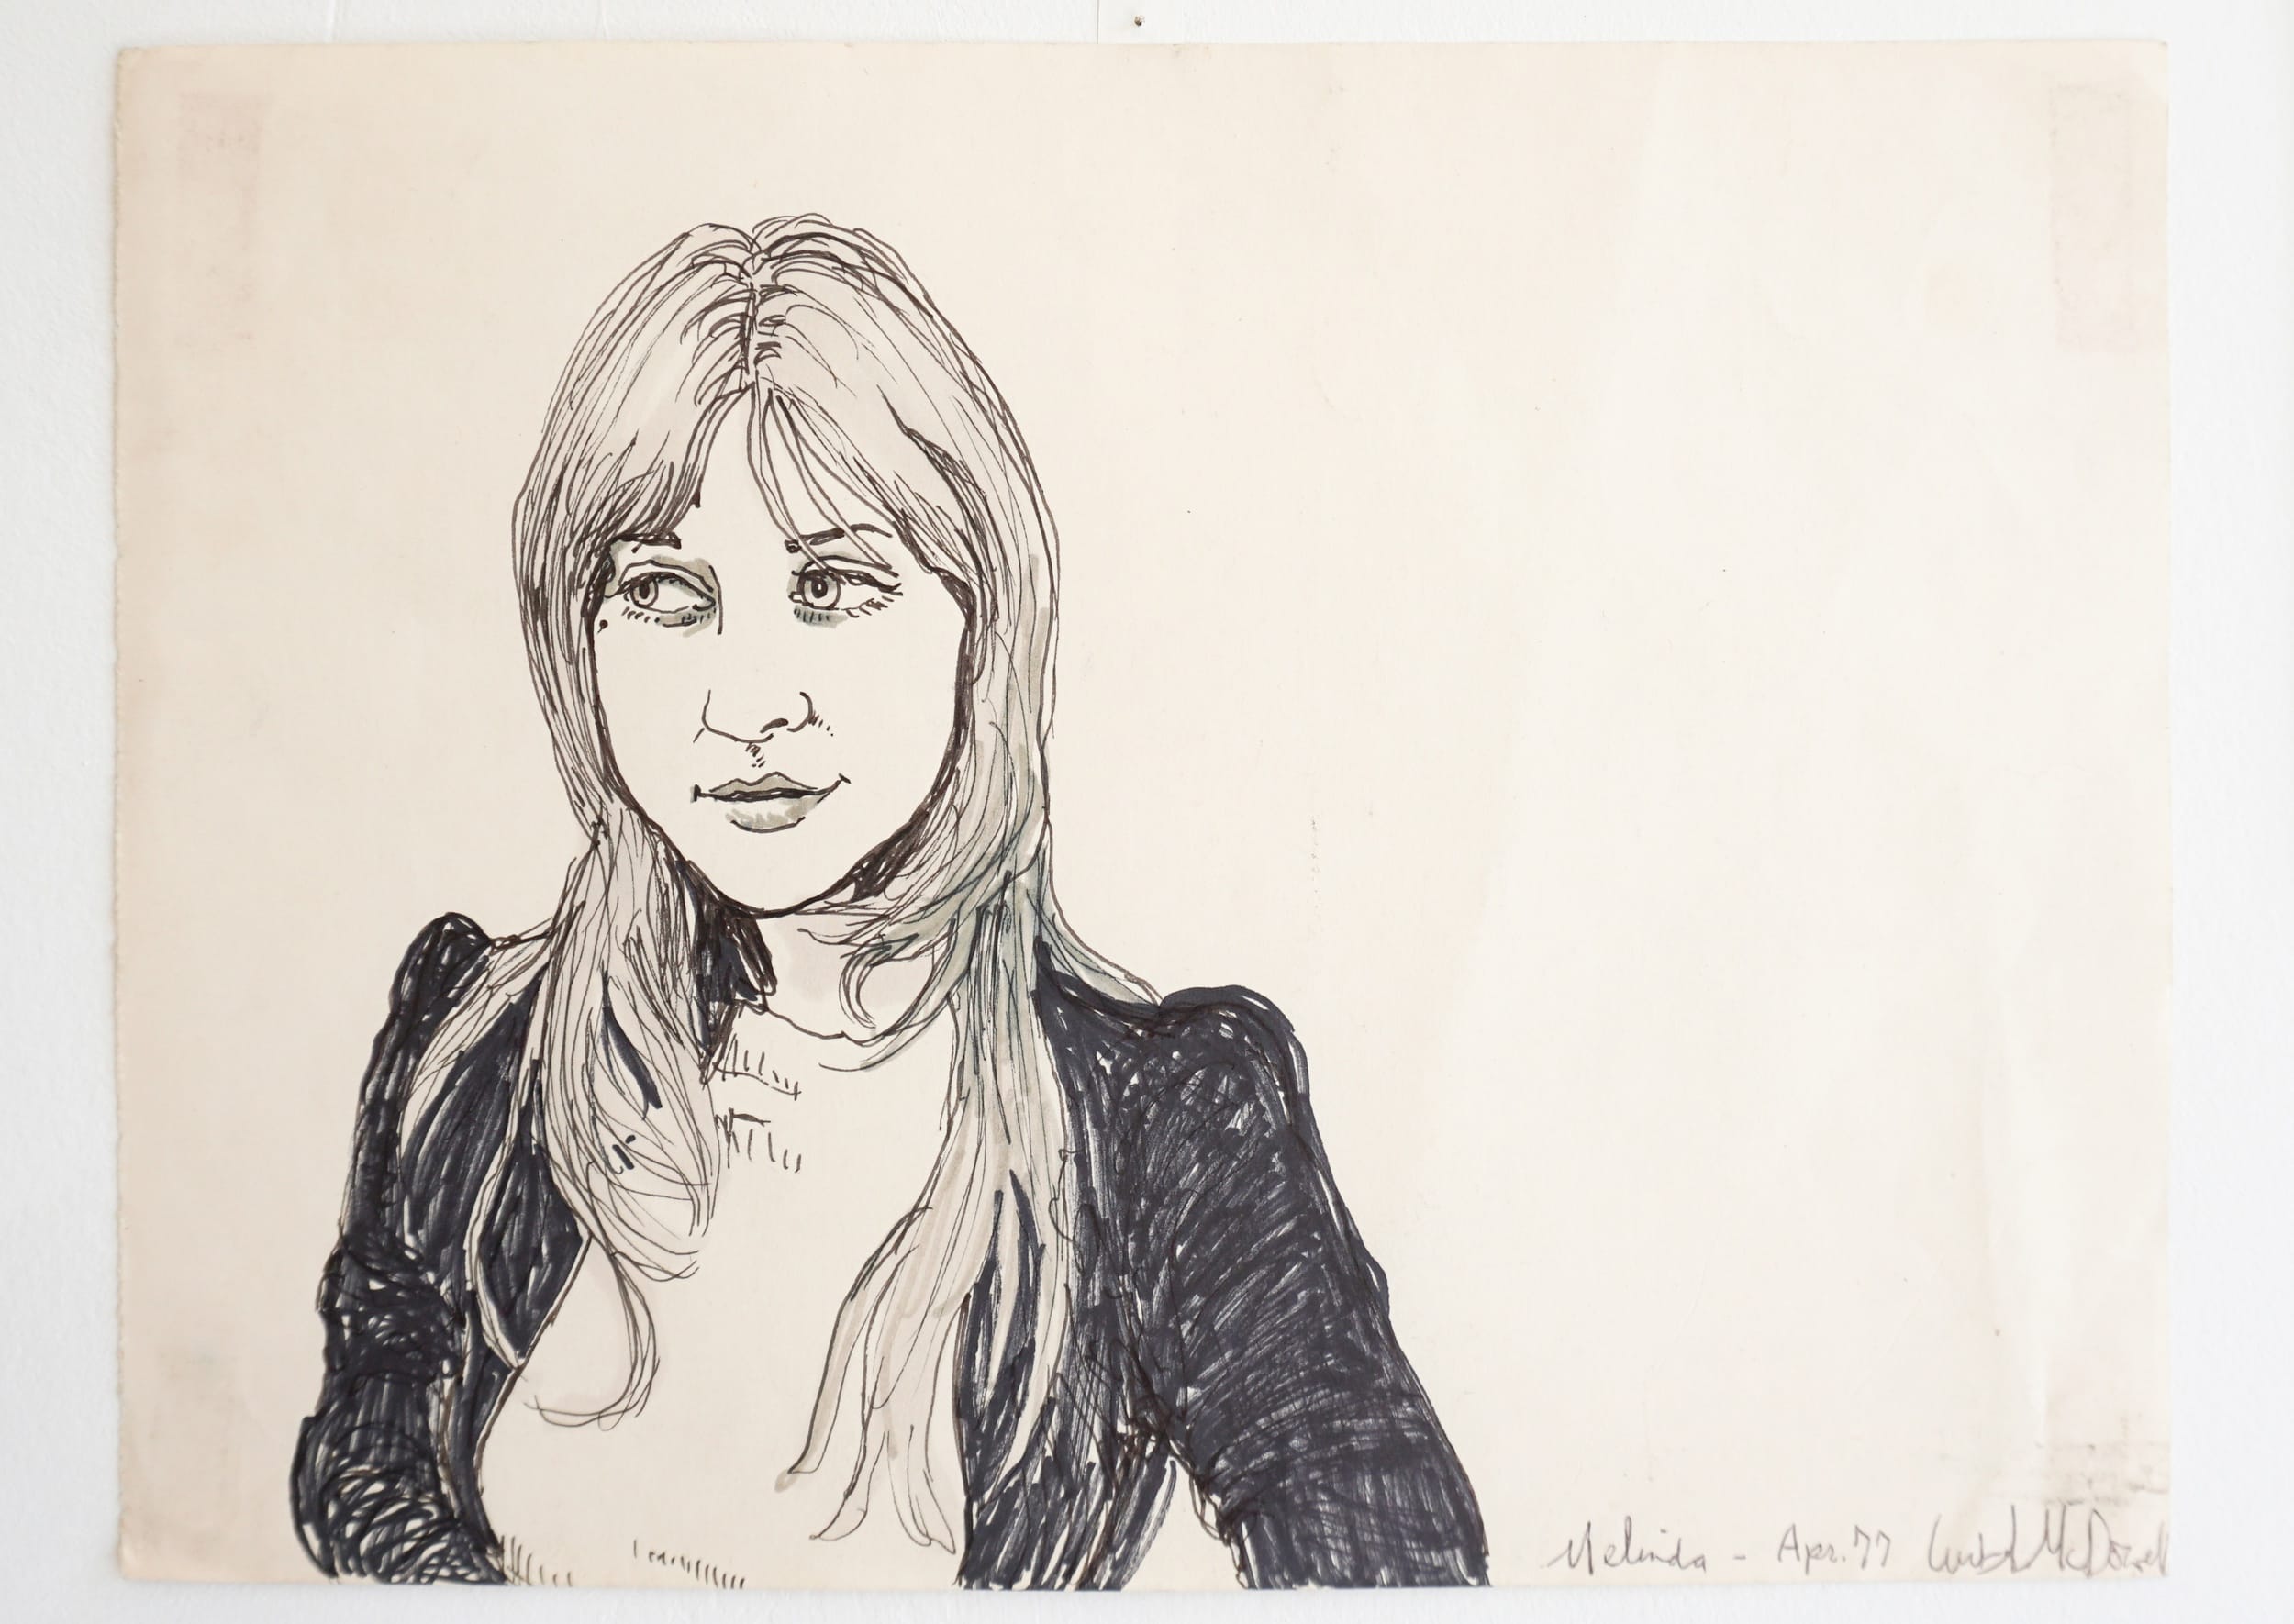  Curt McDowell  Melinda , 1977 Ink on paper 9 x 12 inches 